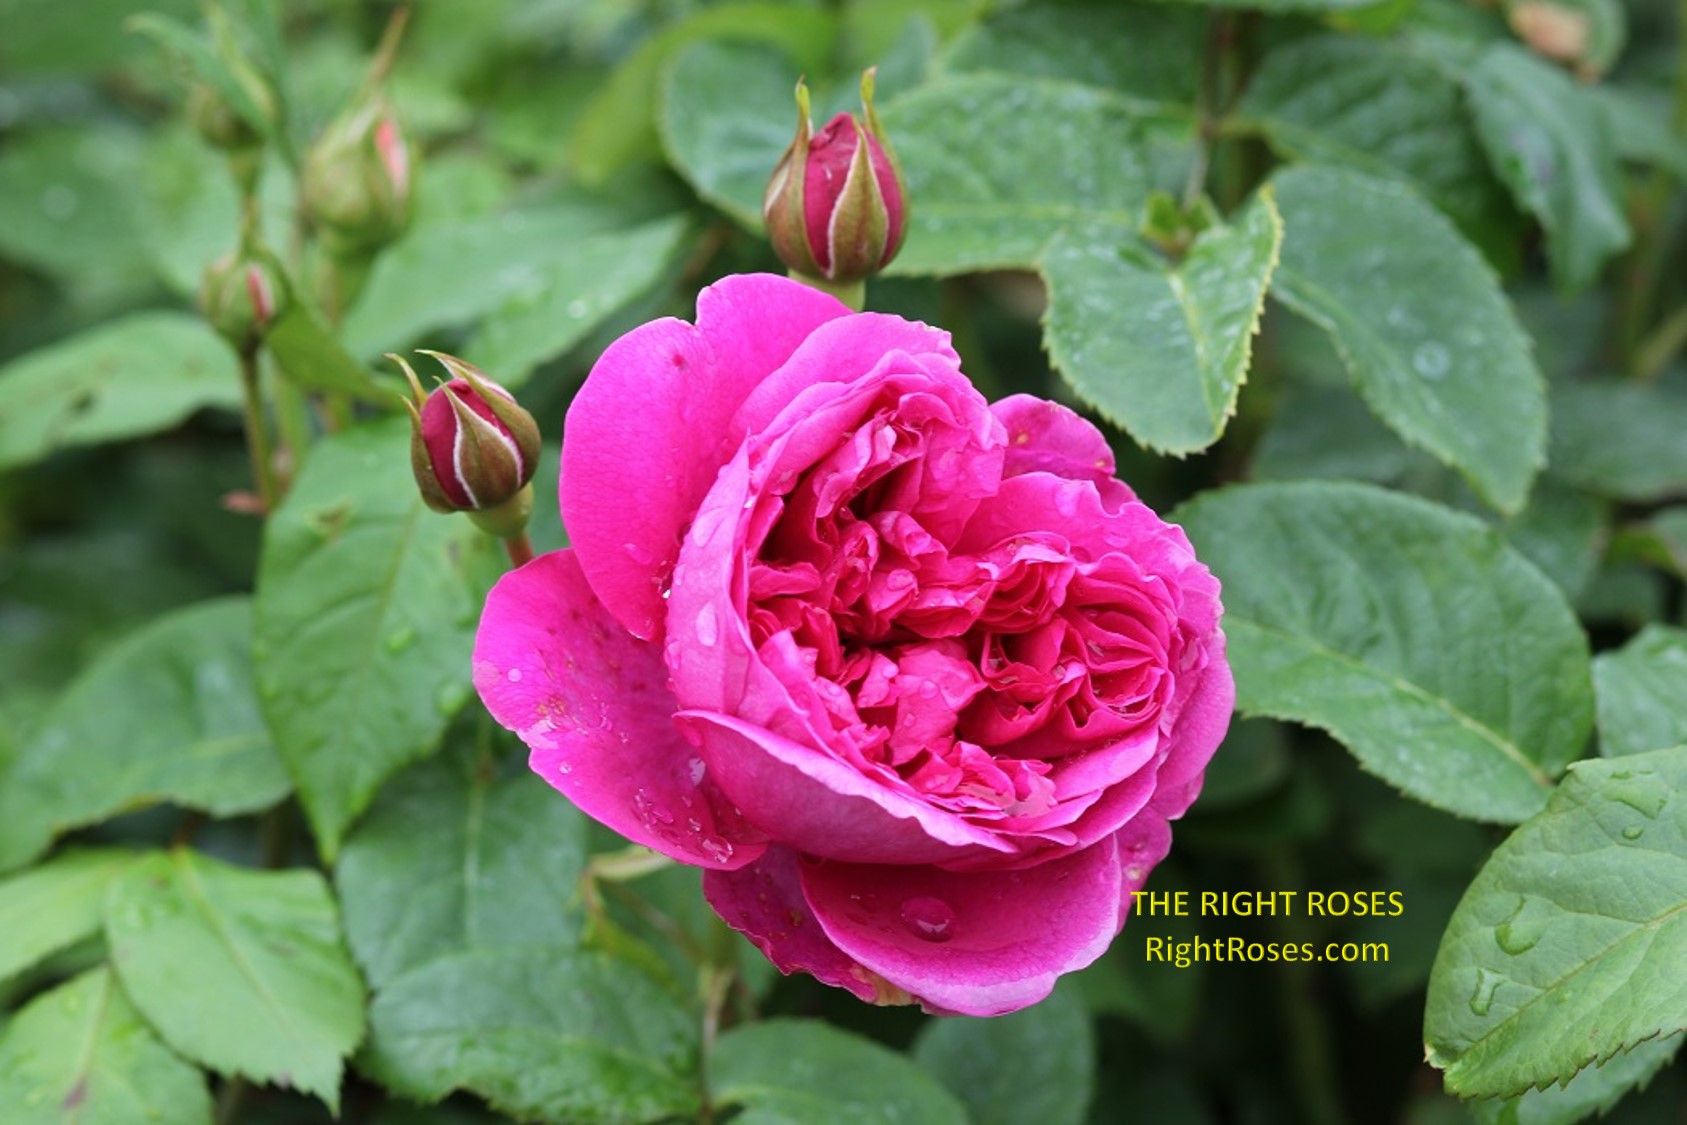 James L Austin rose review the right roses score best top garden store david austin english roses rose products rose rating the right leap rose food fertilizer